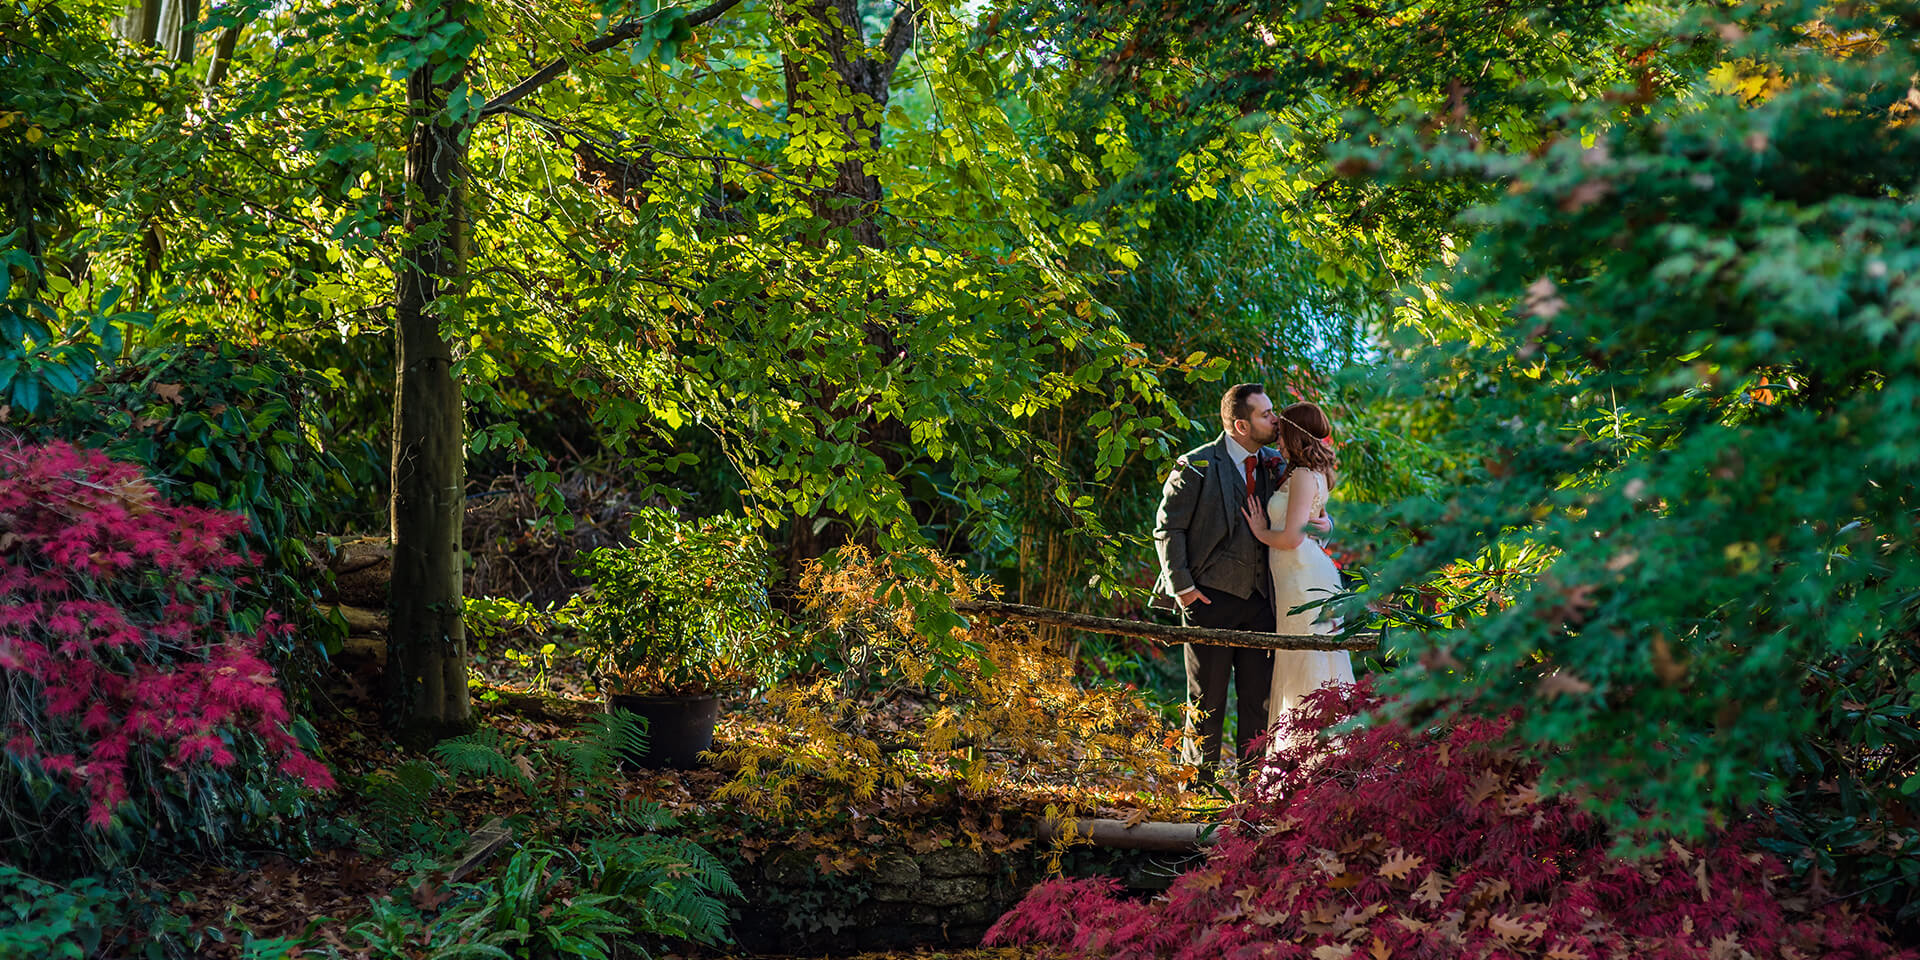 The bride and groom enjoy some time together in the beautiful surrounding gardens of Rivervale Barn